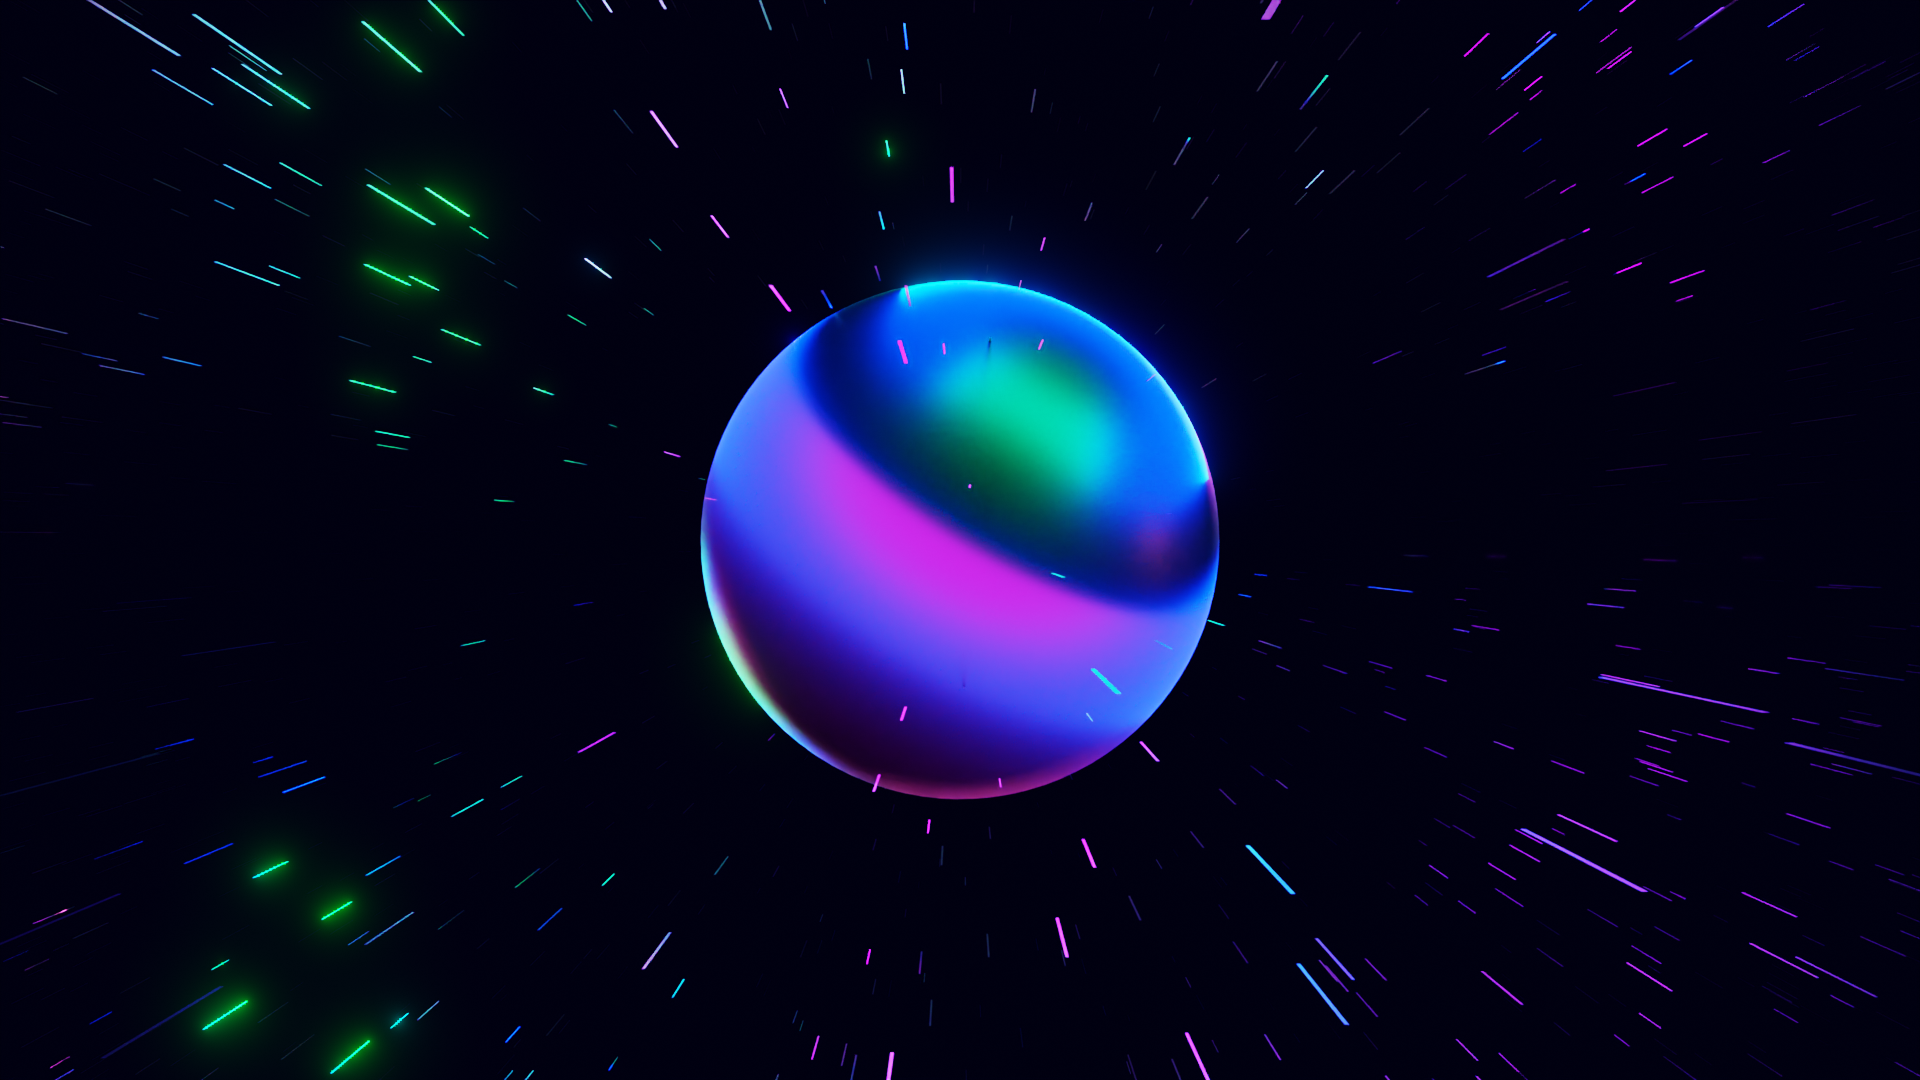 Abstract 3D Abstract Orb Sphere Digital Art 1920x1080